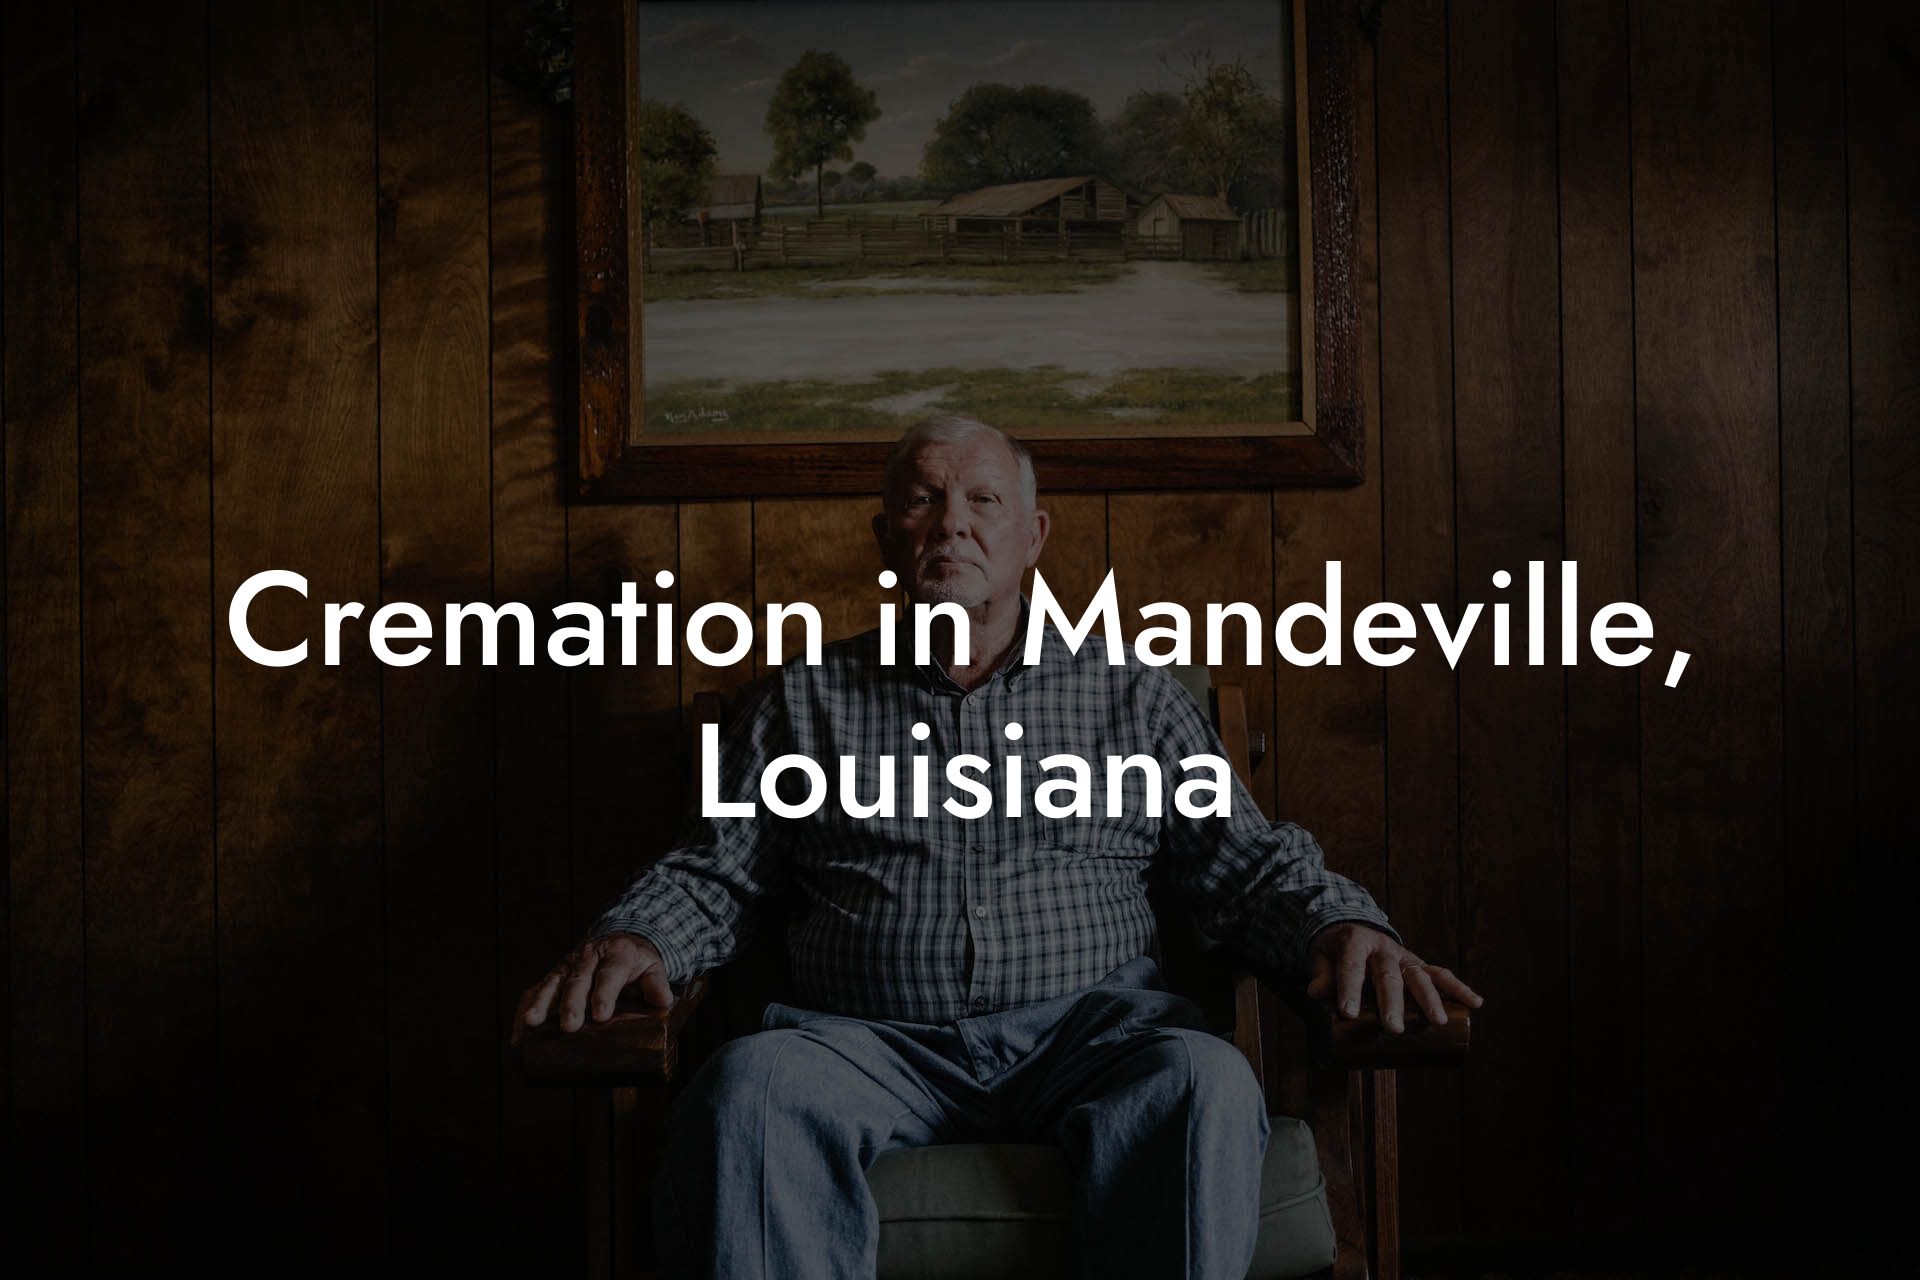 Cremation in Mandeville, Louisiana